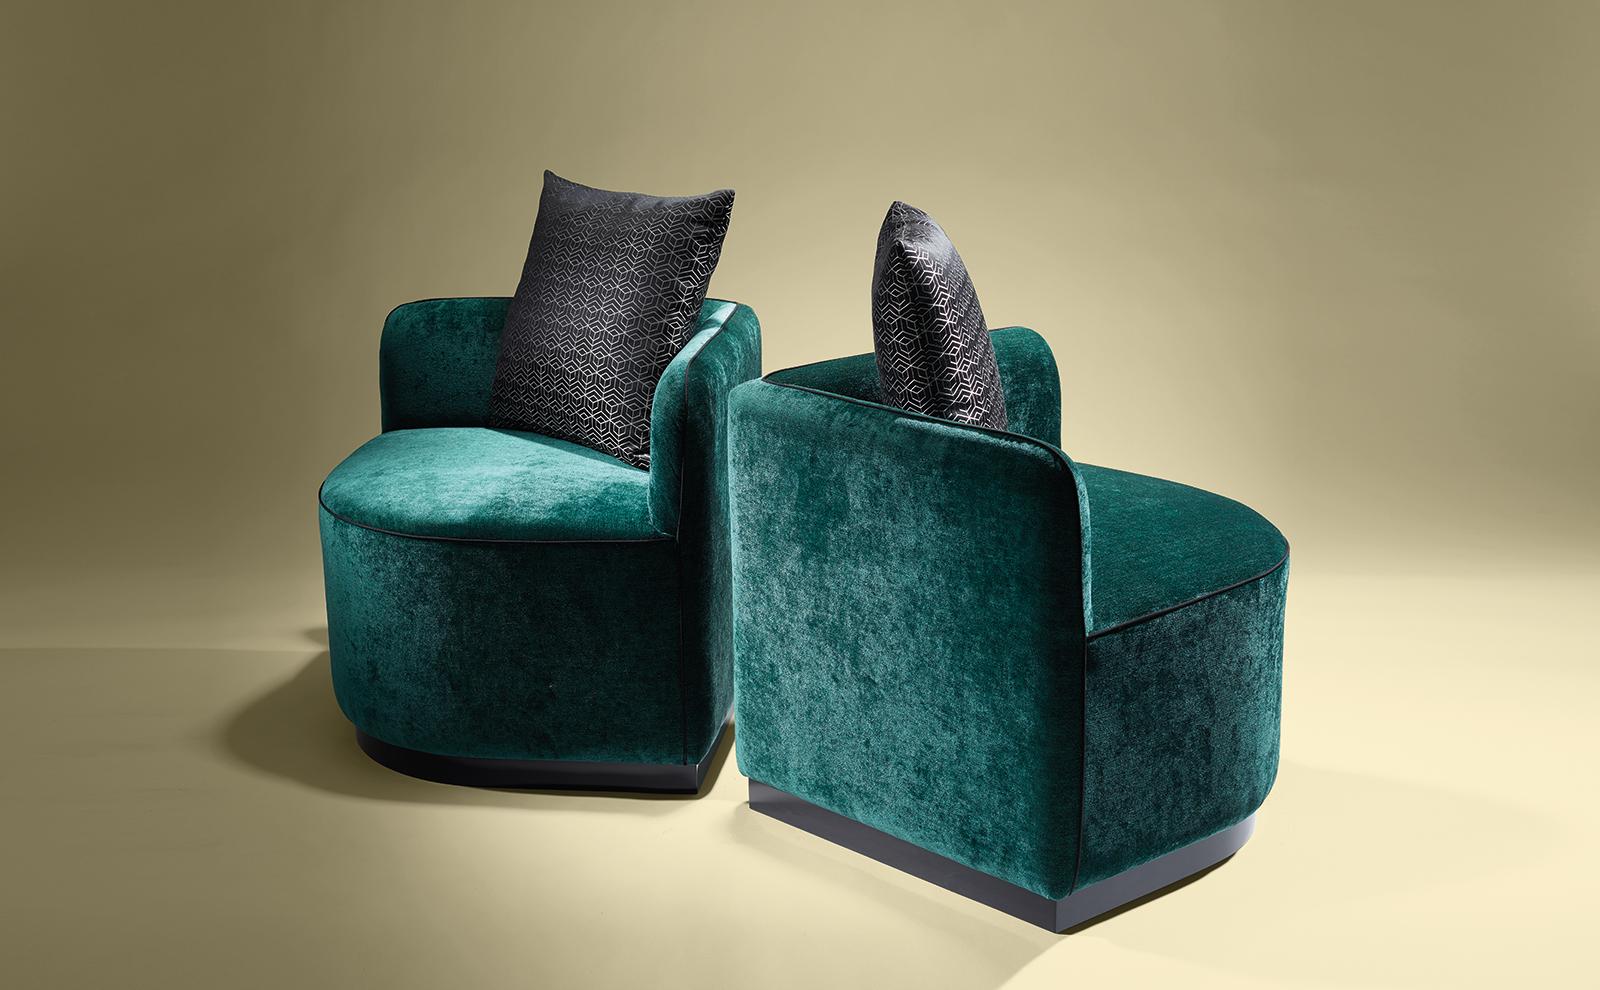 Tessa pouf with lacquered base and velvet (Lelievre Fabrics in images)
Fabric not included quantity: 98 in.

Bespoke / Customizable
Identical shapes with different sizes and finishings.
All RAL colors available. (Mate / Half Gloss / Gloss)